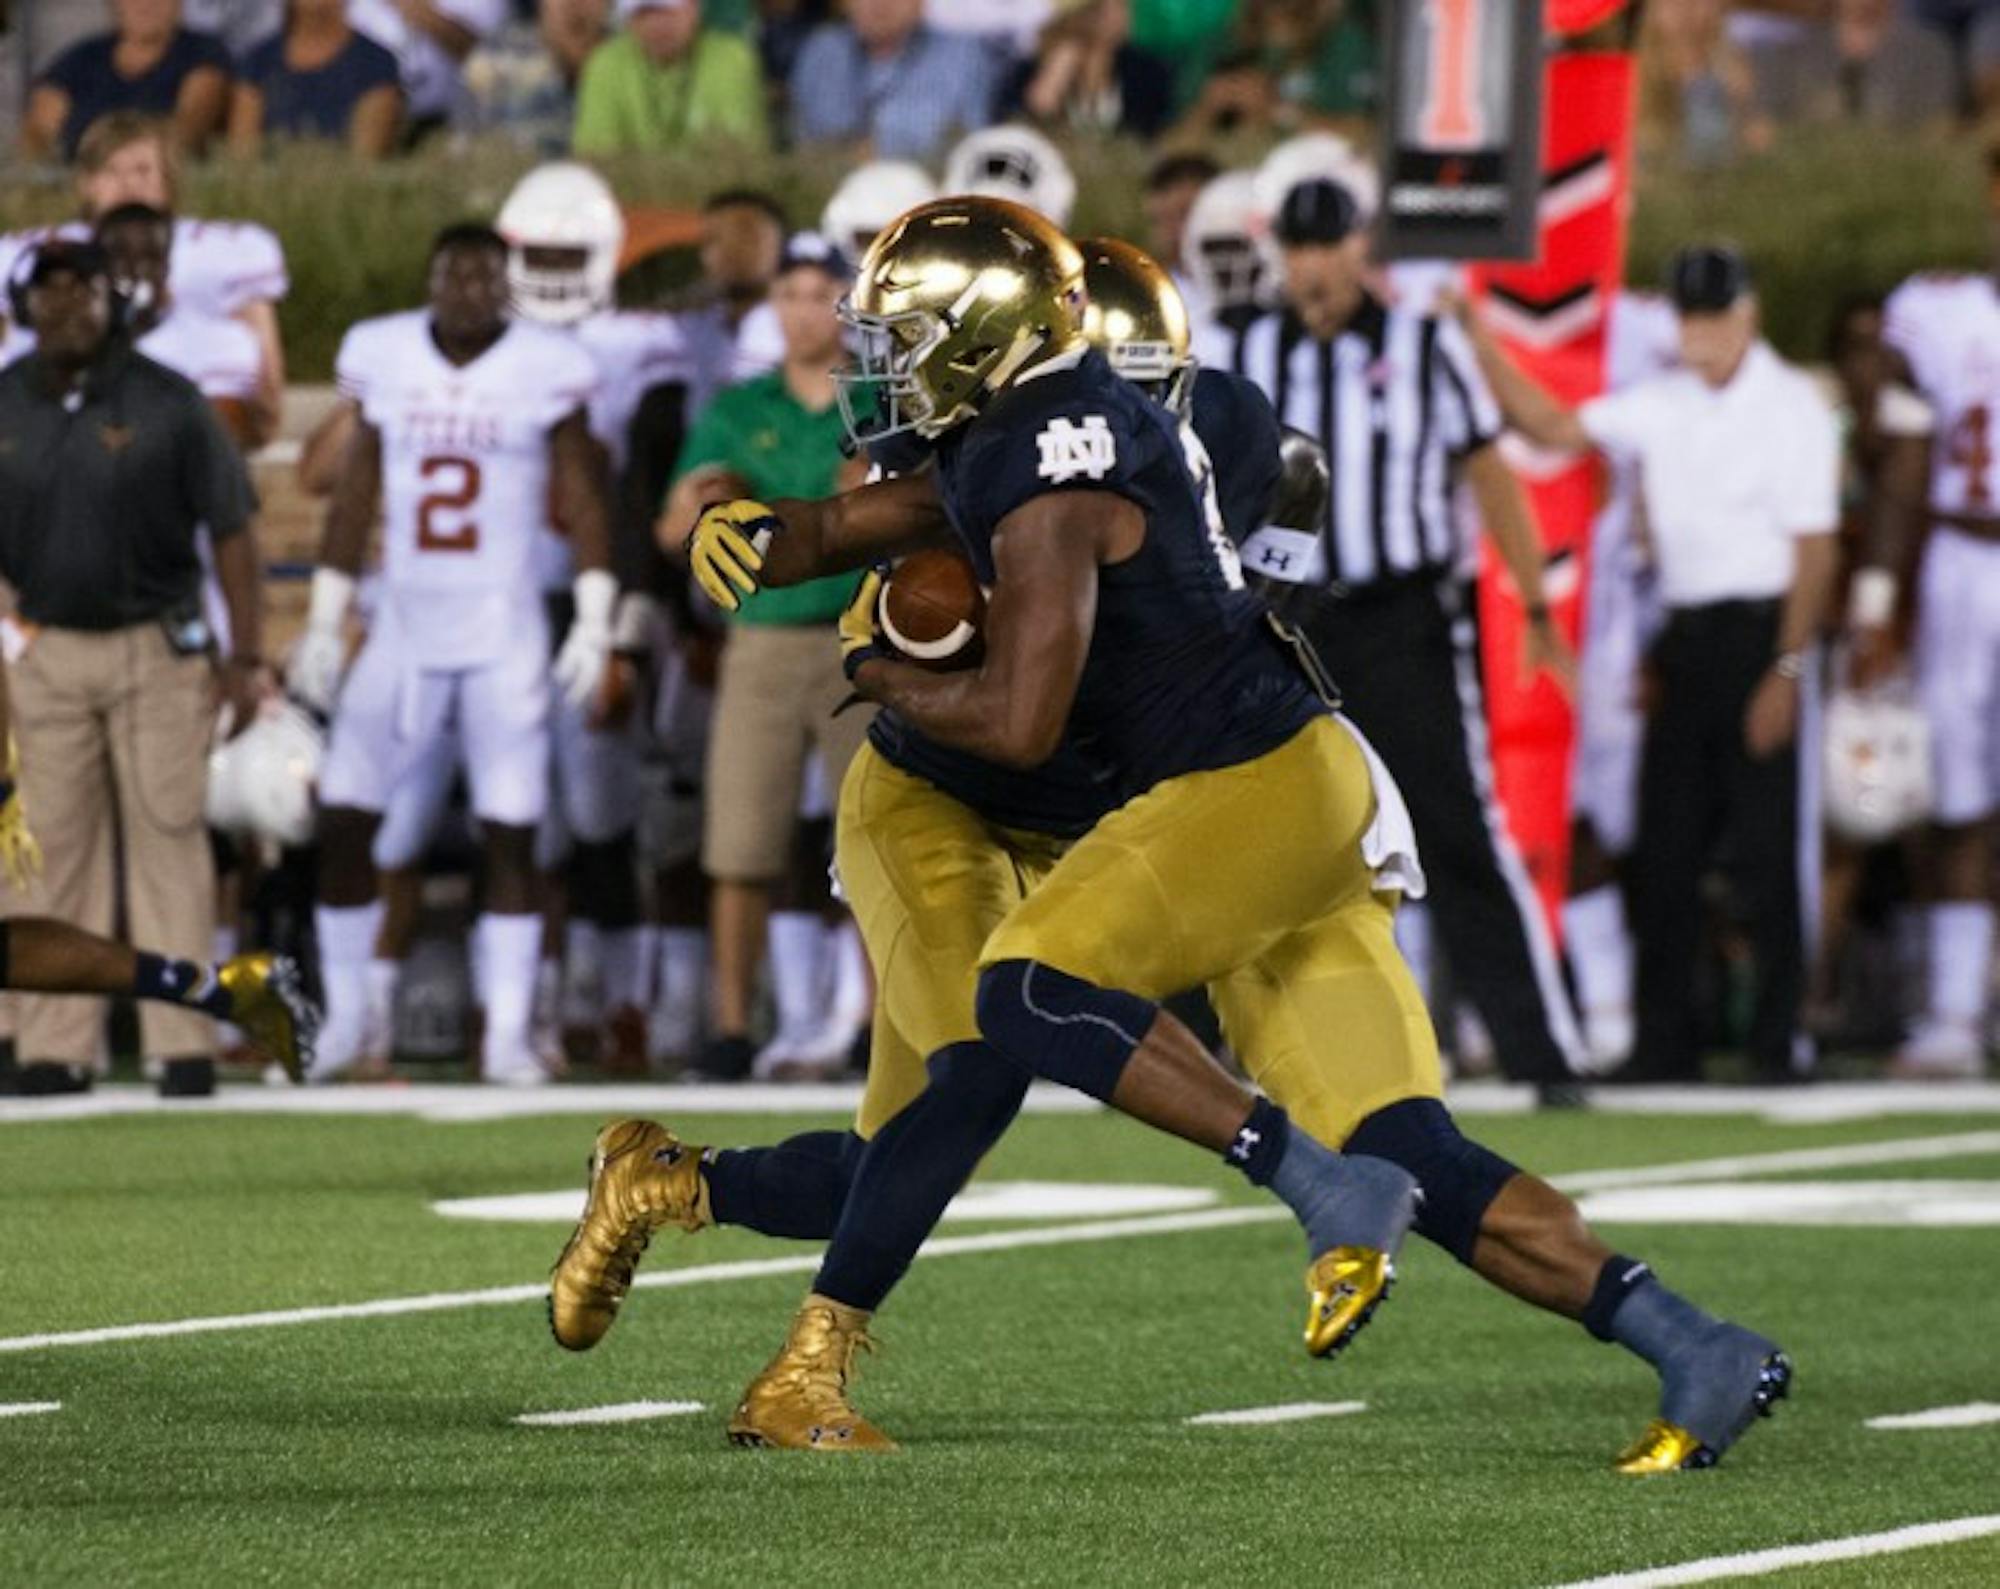 Irish senior running back Tarean Folston receives a handoff during Notre Dame’s 38-3 victory over Texas on Sept. 5 at Notre Dame Stadium. Folston is returning from a torn ACL suffered in last year's game against Texas.